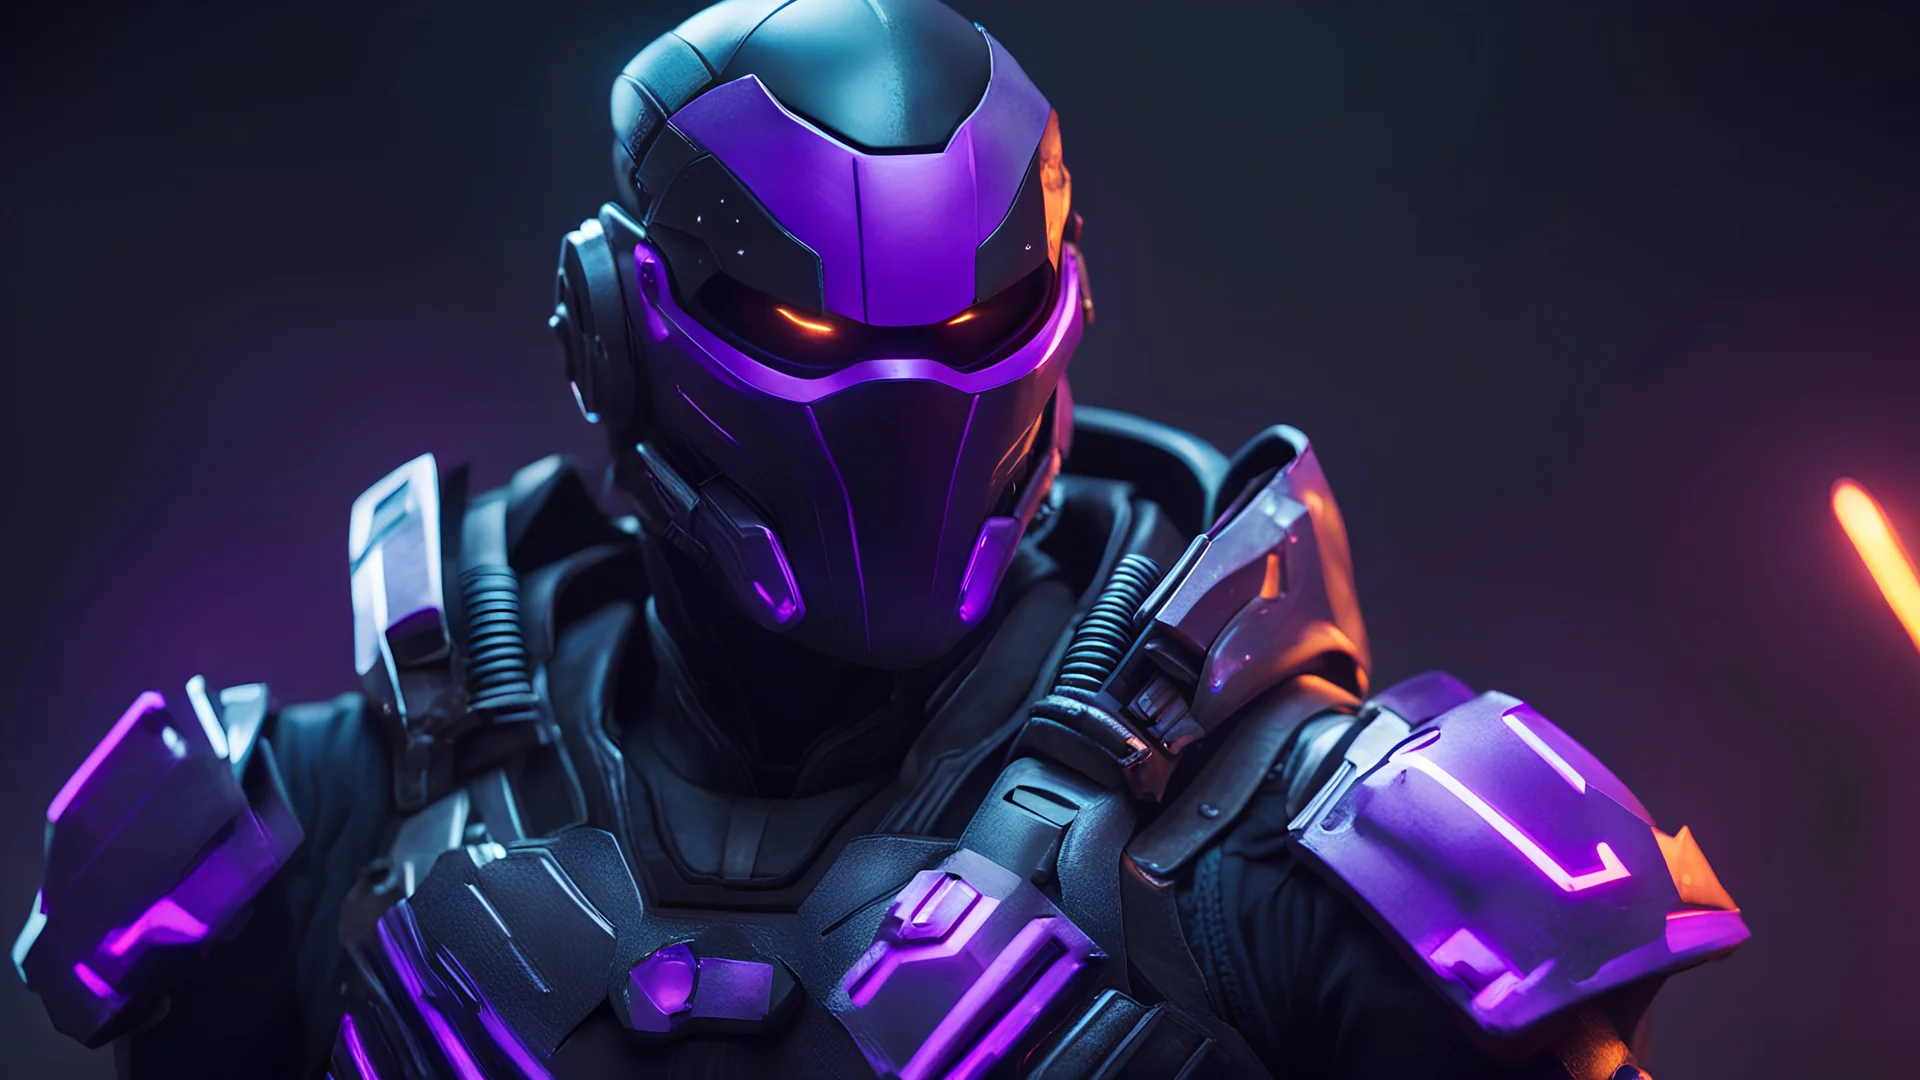 A futuristic assassin wearing futuristic armor colors of black and neon purple an a black visor deathstroke style. 8k contrast an saturated very detailed focus on detail ultra realistic